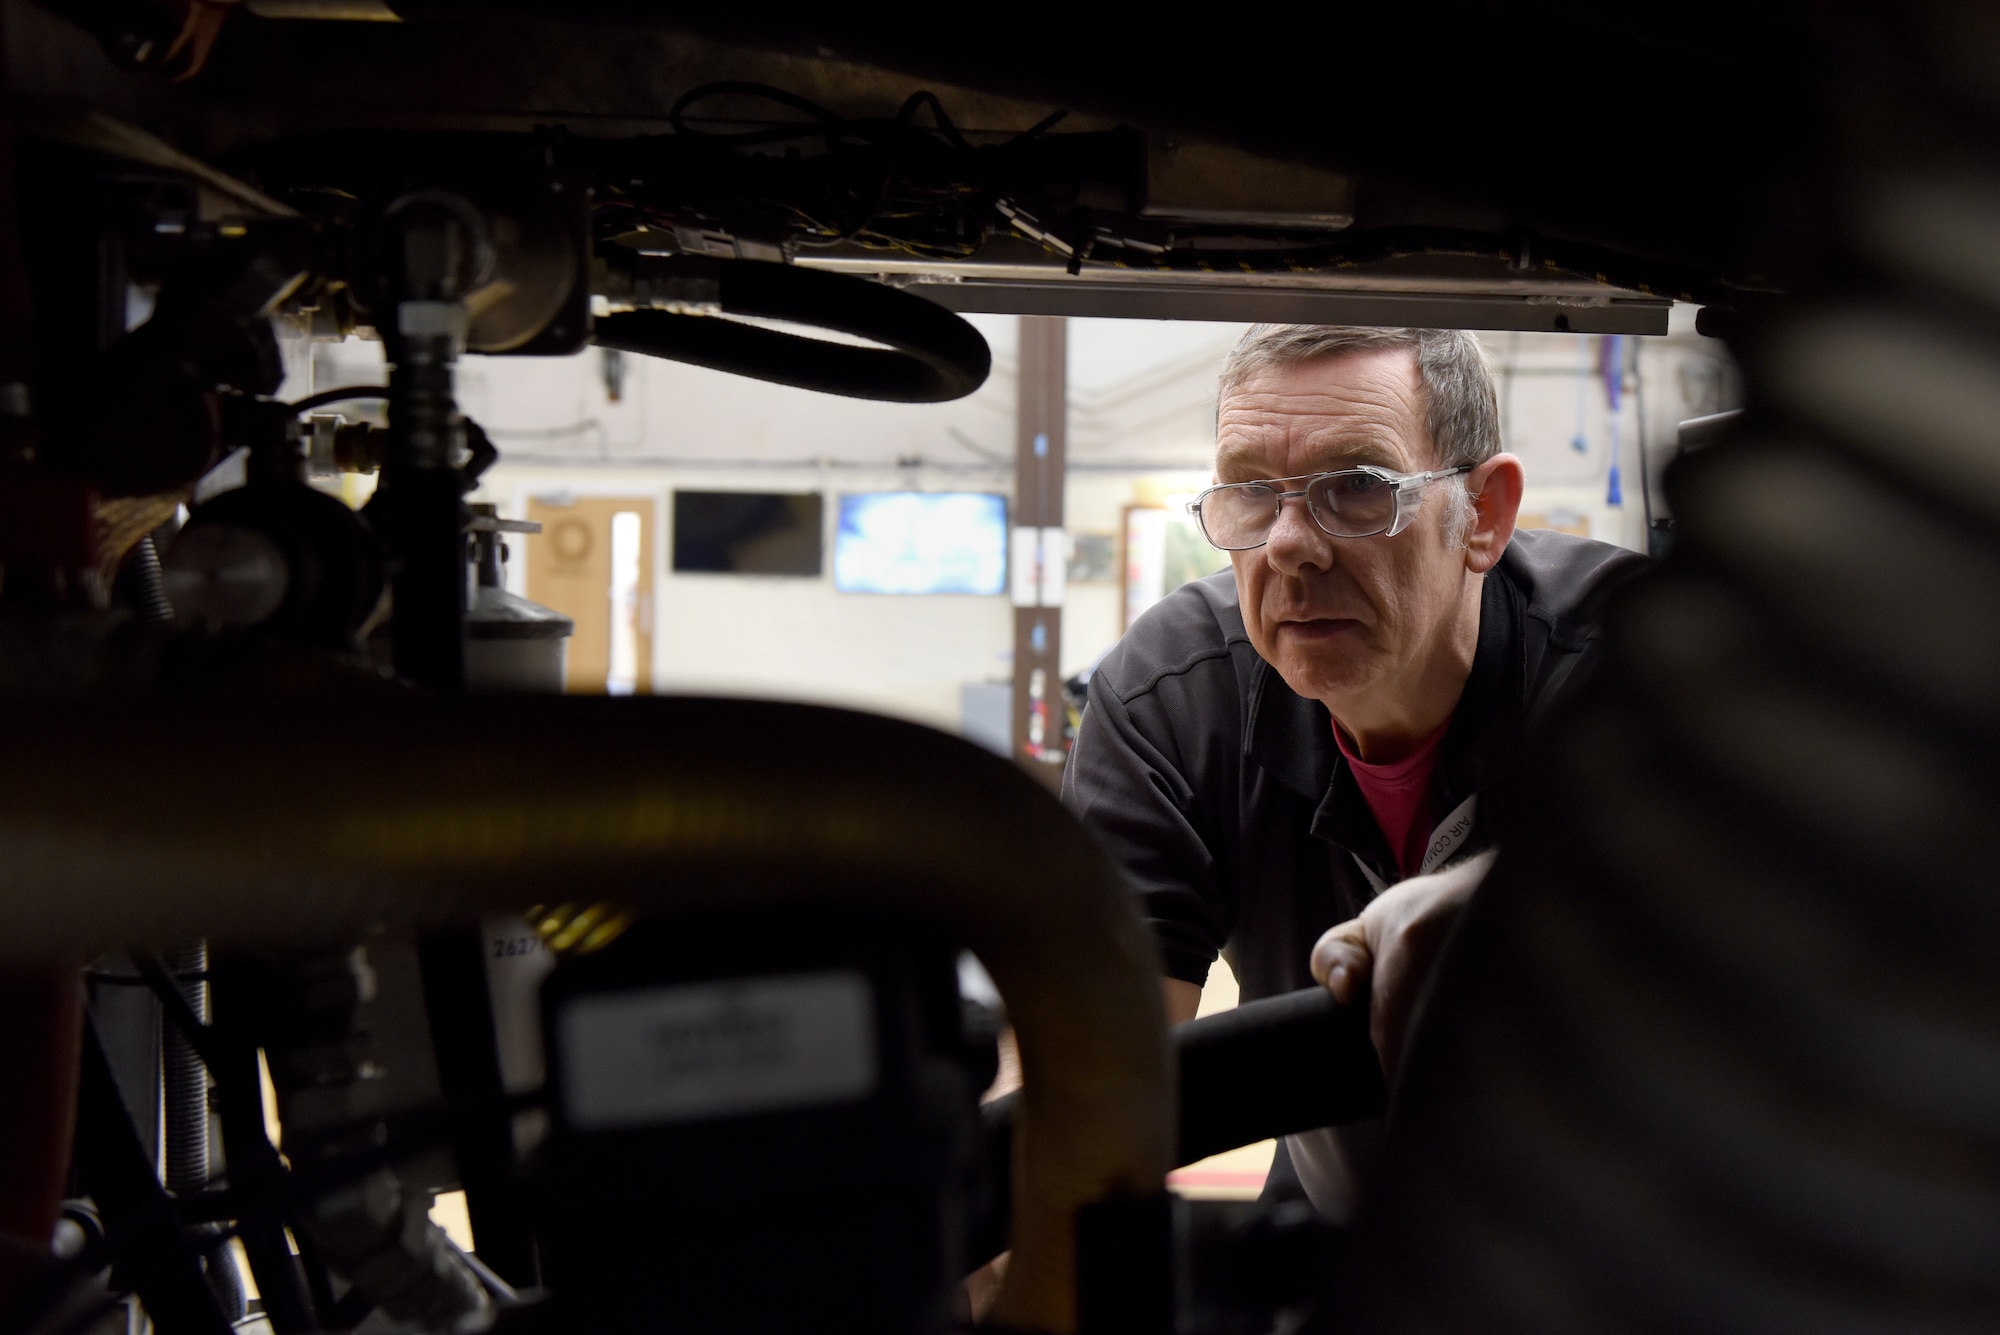 Robert Hook, 48th Logistics Readiness Squadron fire truck maintenance supervisor, inspects internal fire truck components at Royal Air Force Lakenheath, England, Nov. 22, 2019. The mission for fire truck maintenance is to provide quality service for the fire department vehicle fleet enabling protection for flying missions and structural facilities. (U.S. Air Force photo by Airman 1st Class Jessi Monte)